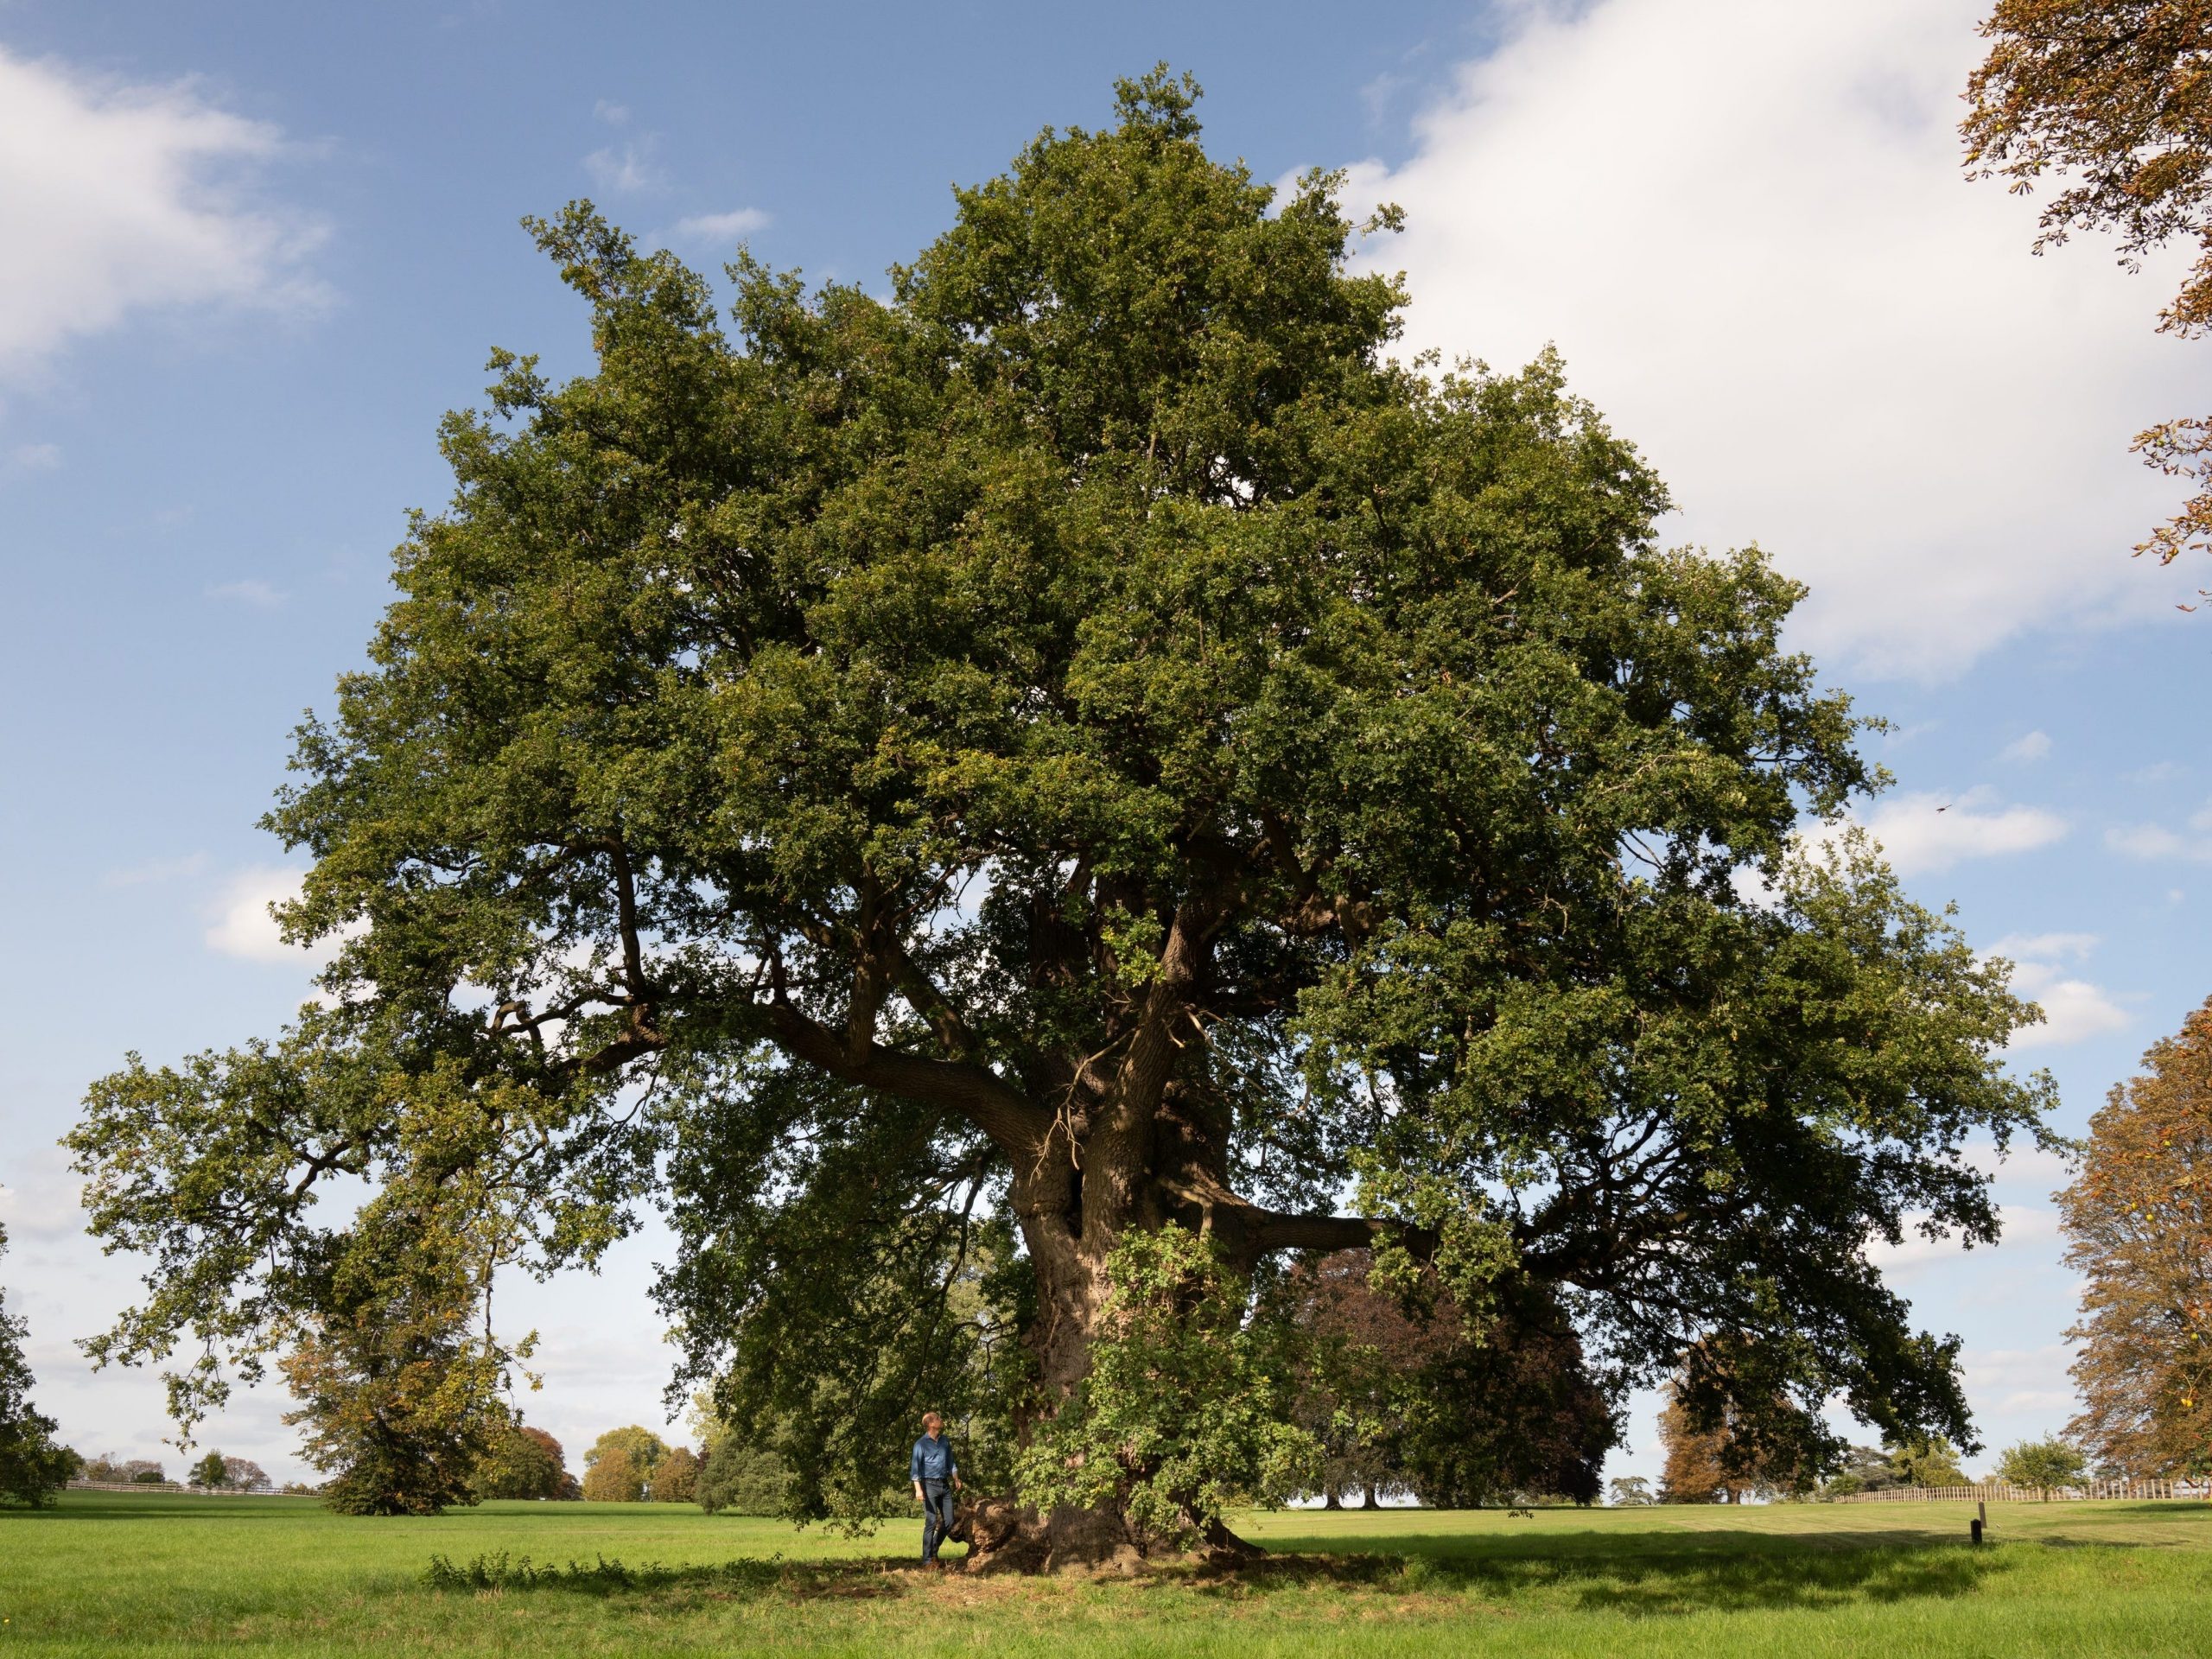 Prince William delivered his TED Talk underneath one of Windsor Castle's giant oak trees.